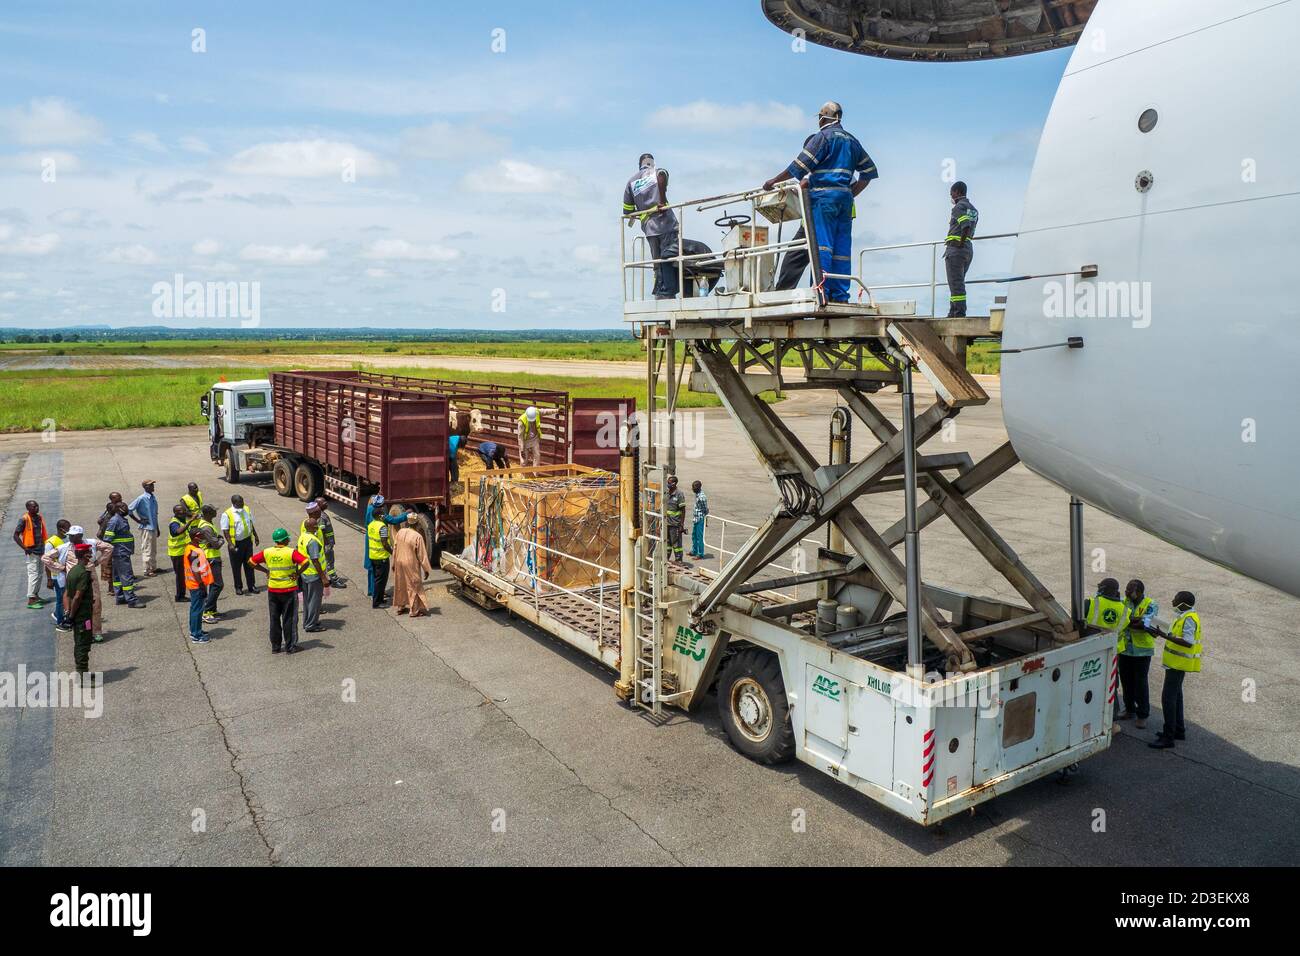 Livestock in wooden boxes secured by nettings being offloaded by a high-loader from a Jumbo Jet with a wide open cargo door at the front of the plane Stock Photo